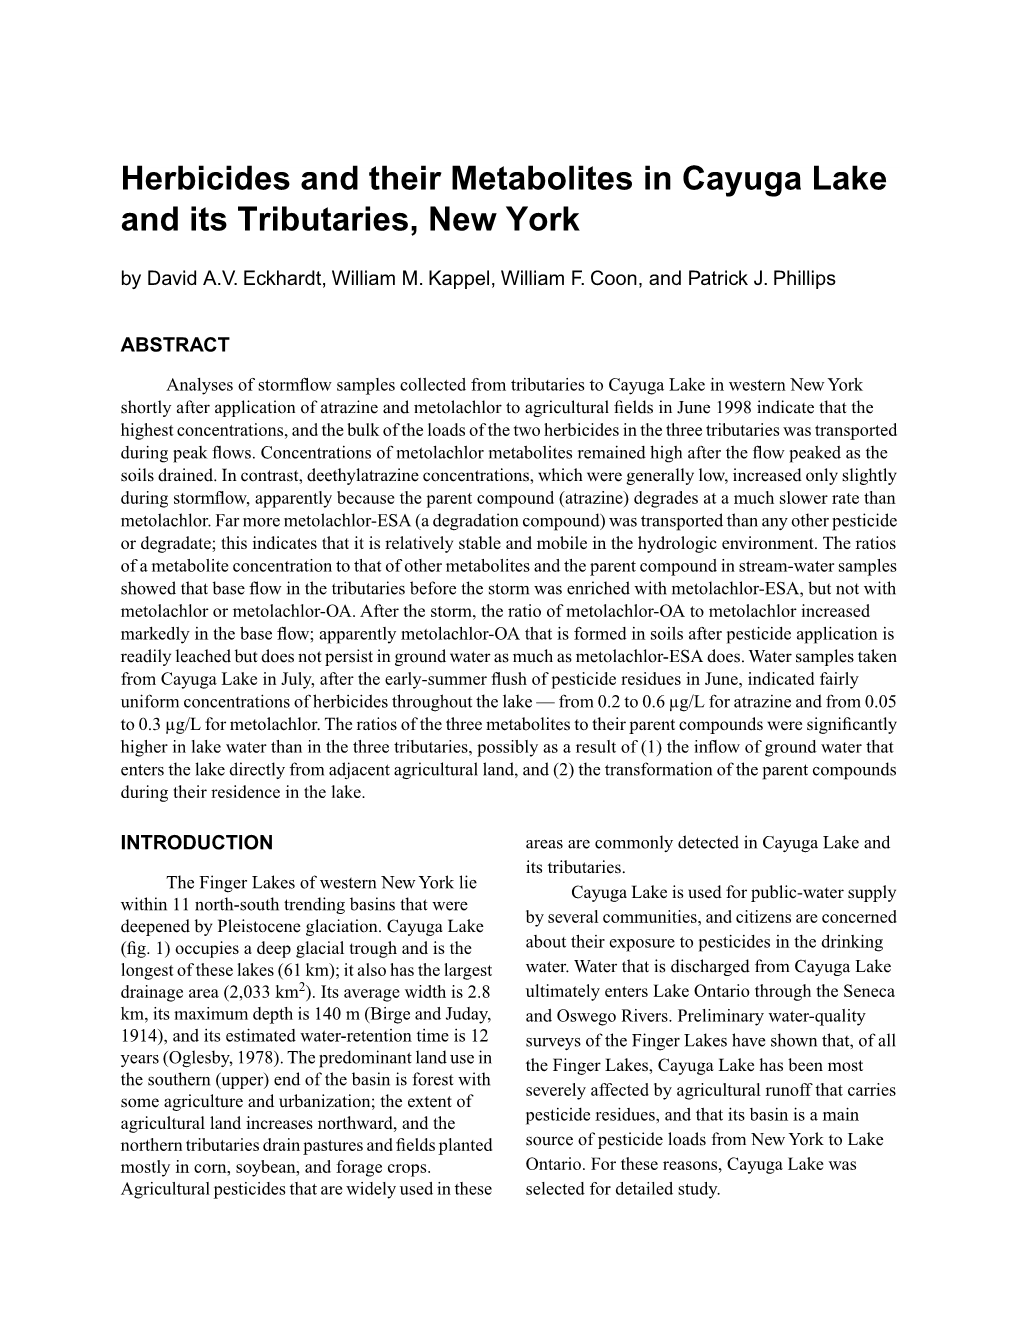 Herbicides and Their Metabolites in Cayuga Lake and Its Tributaries, New York by David A.V